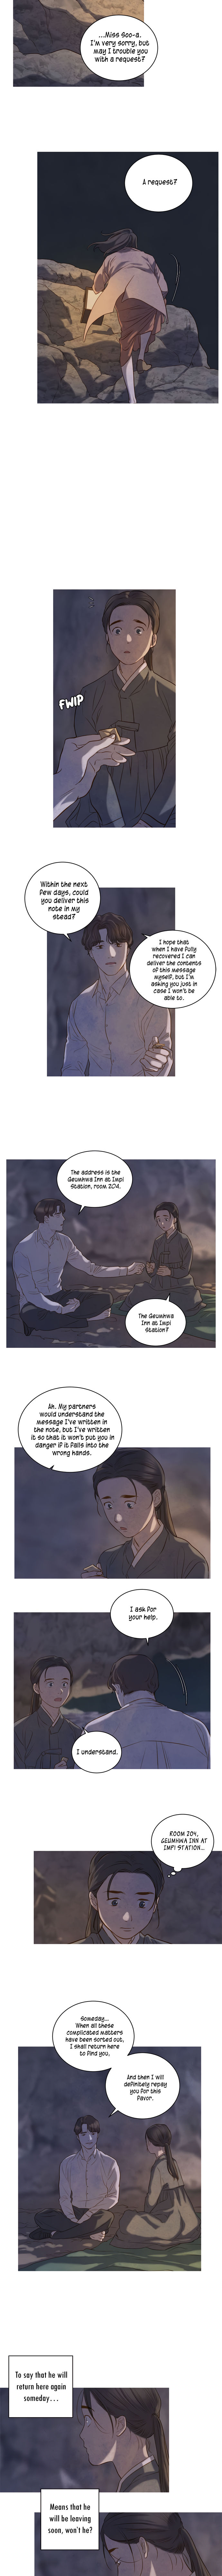 Gorae Byul - The Gyeongseong Mermaid - Chapter 4 Page 12